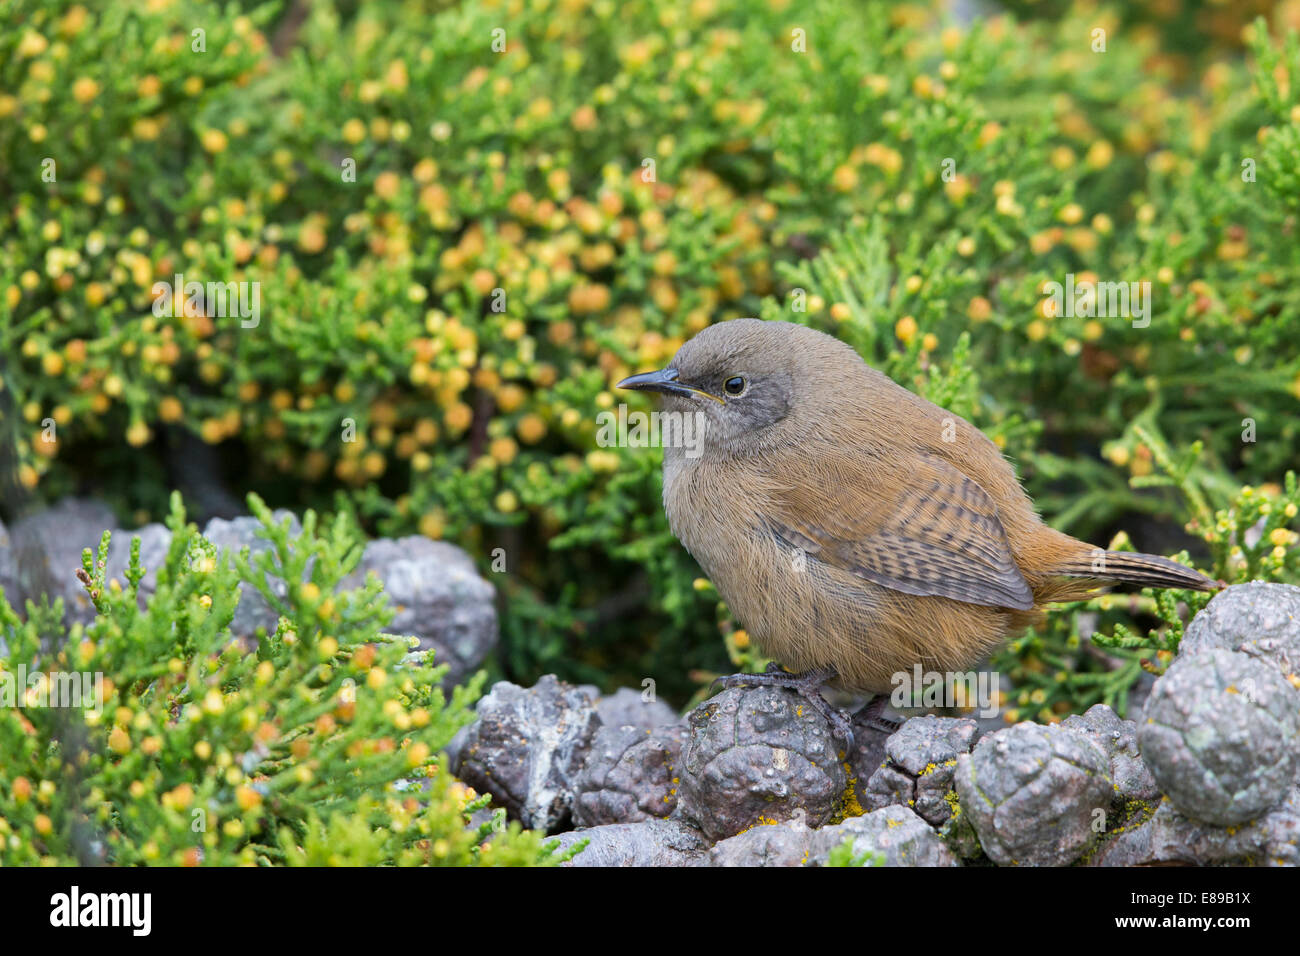 A Cobb's Wren perched on small pine cones Stock Photo